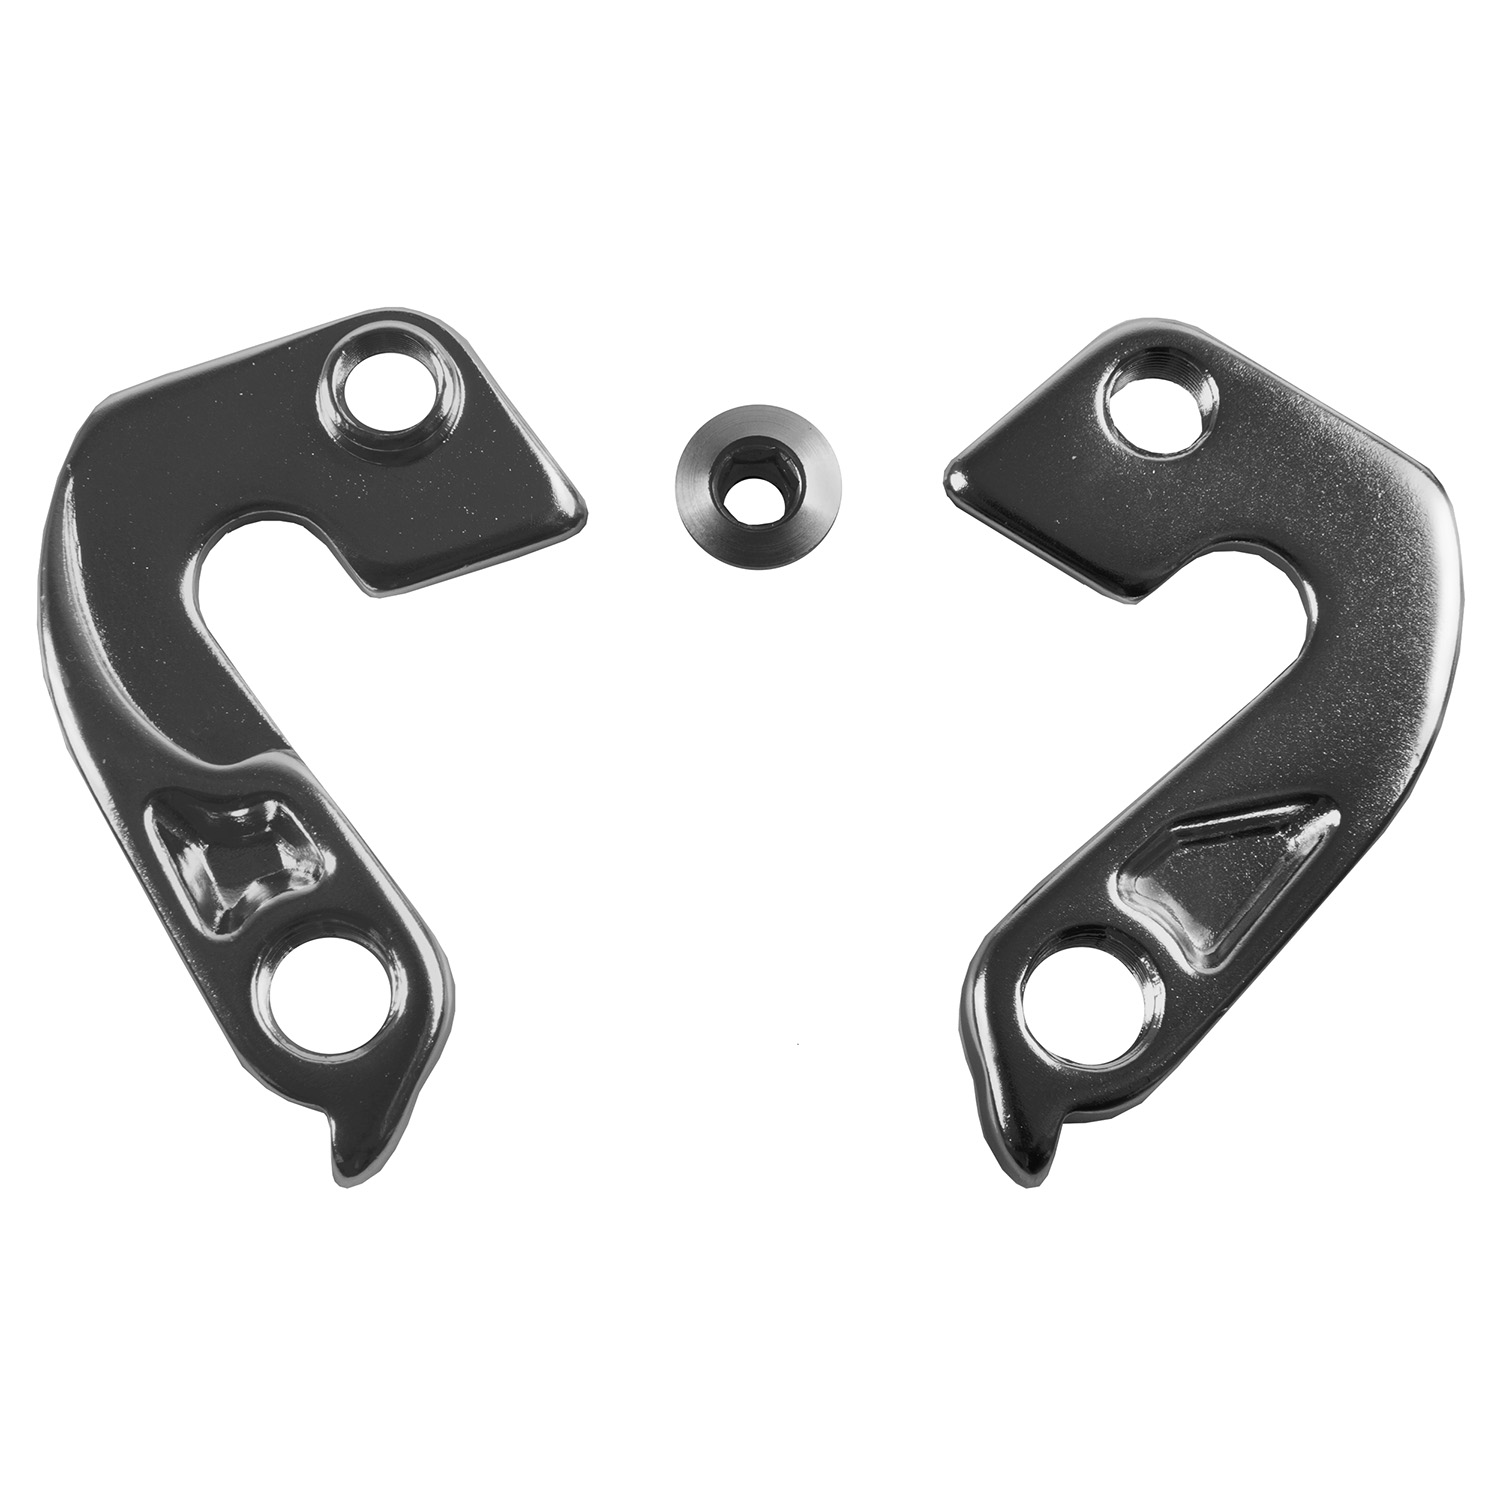 660887 B1 derailleur hanger – AVAILABLE IN SELECTED BIKE SHOPS